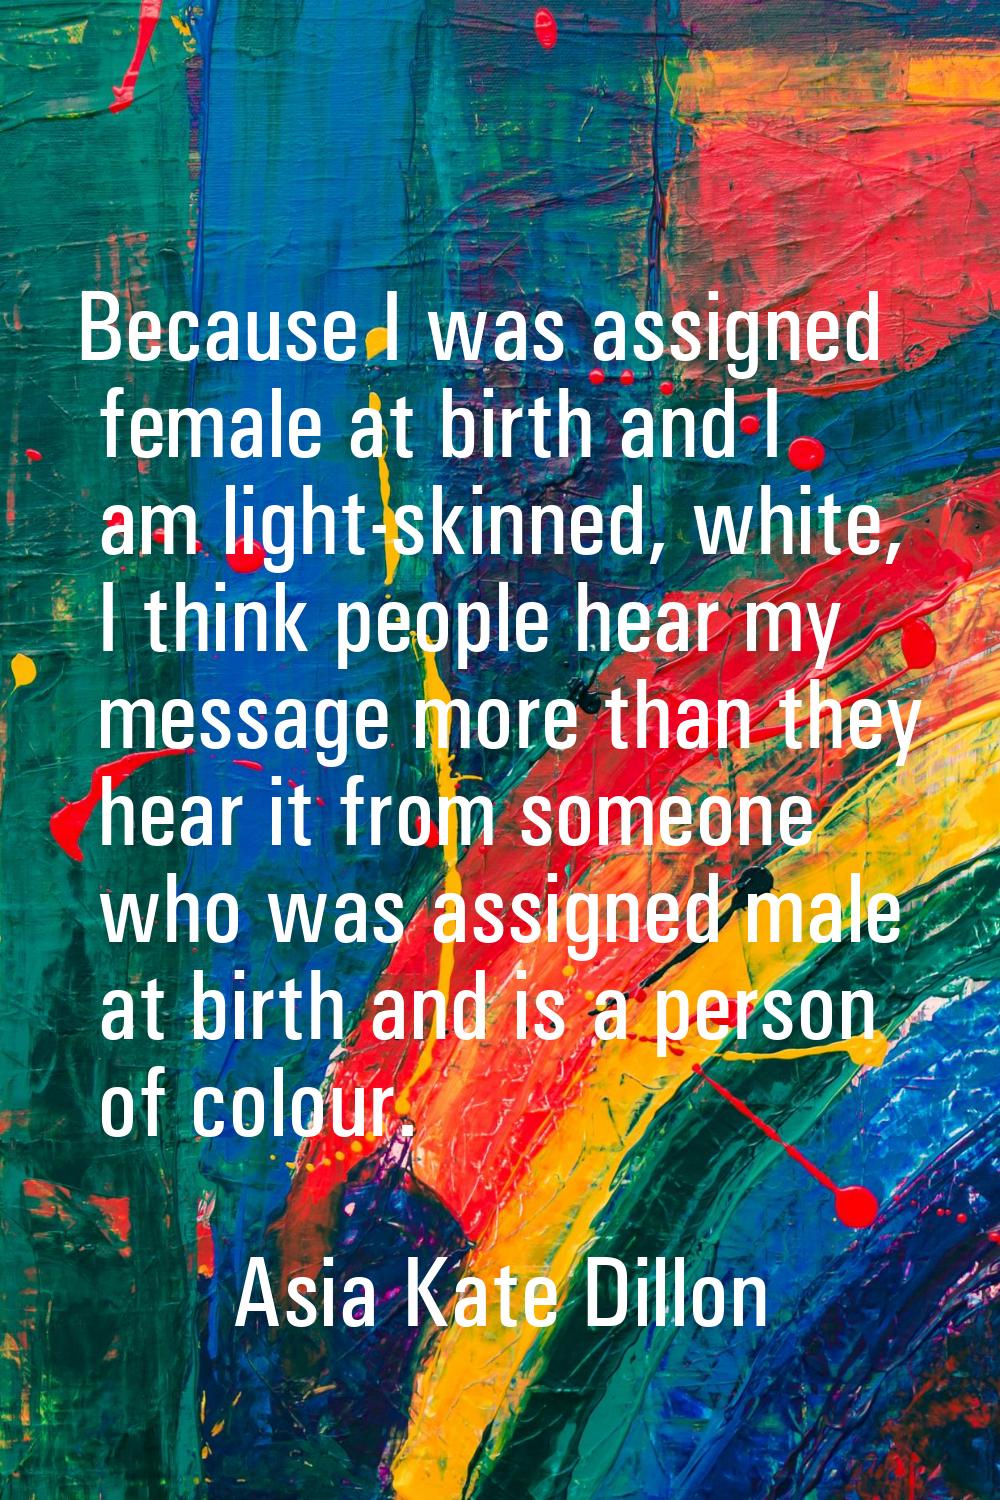 Because I was assigned female at birth and I am light-skinned, white, I think people hear my messag